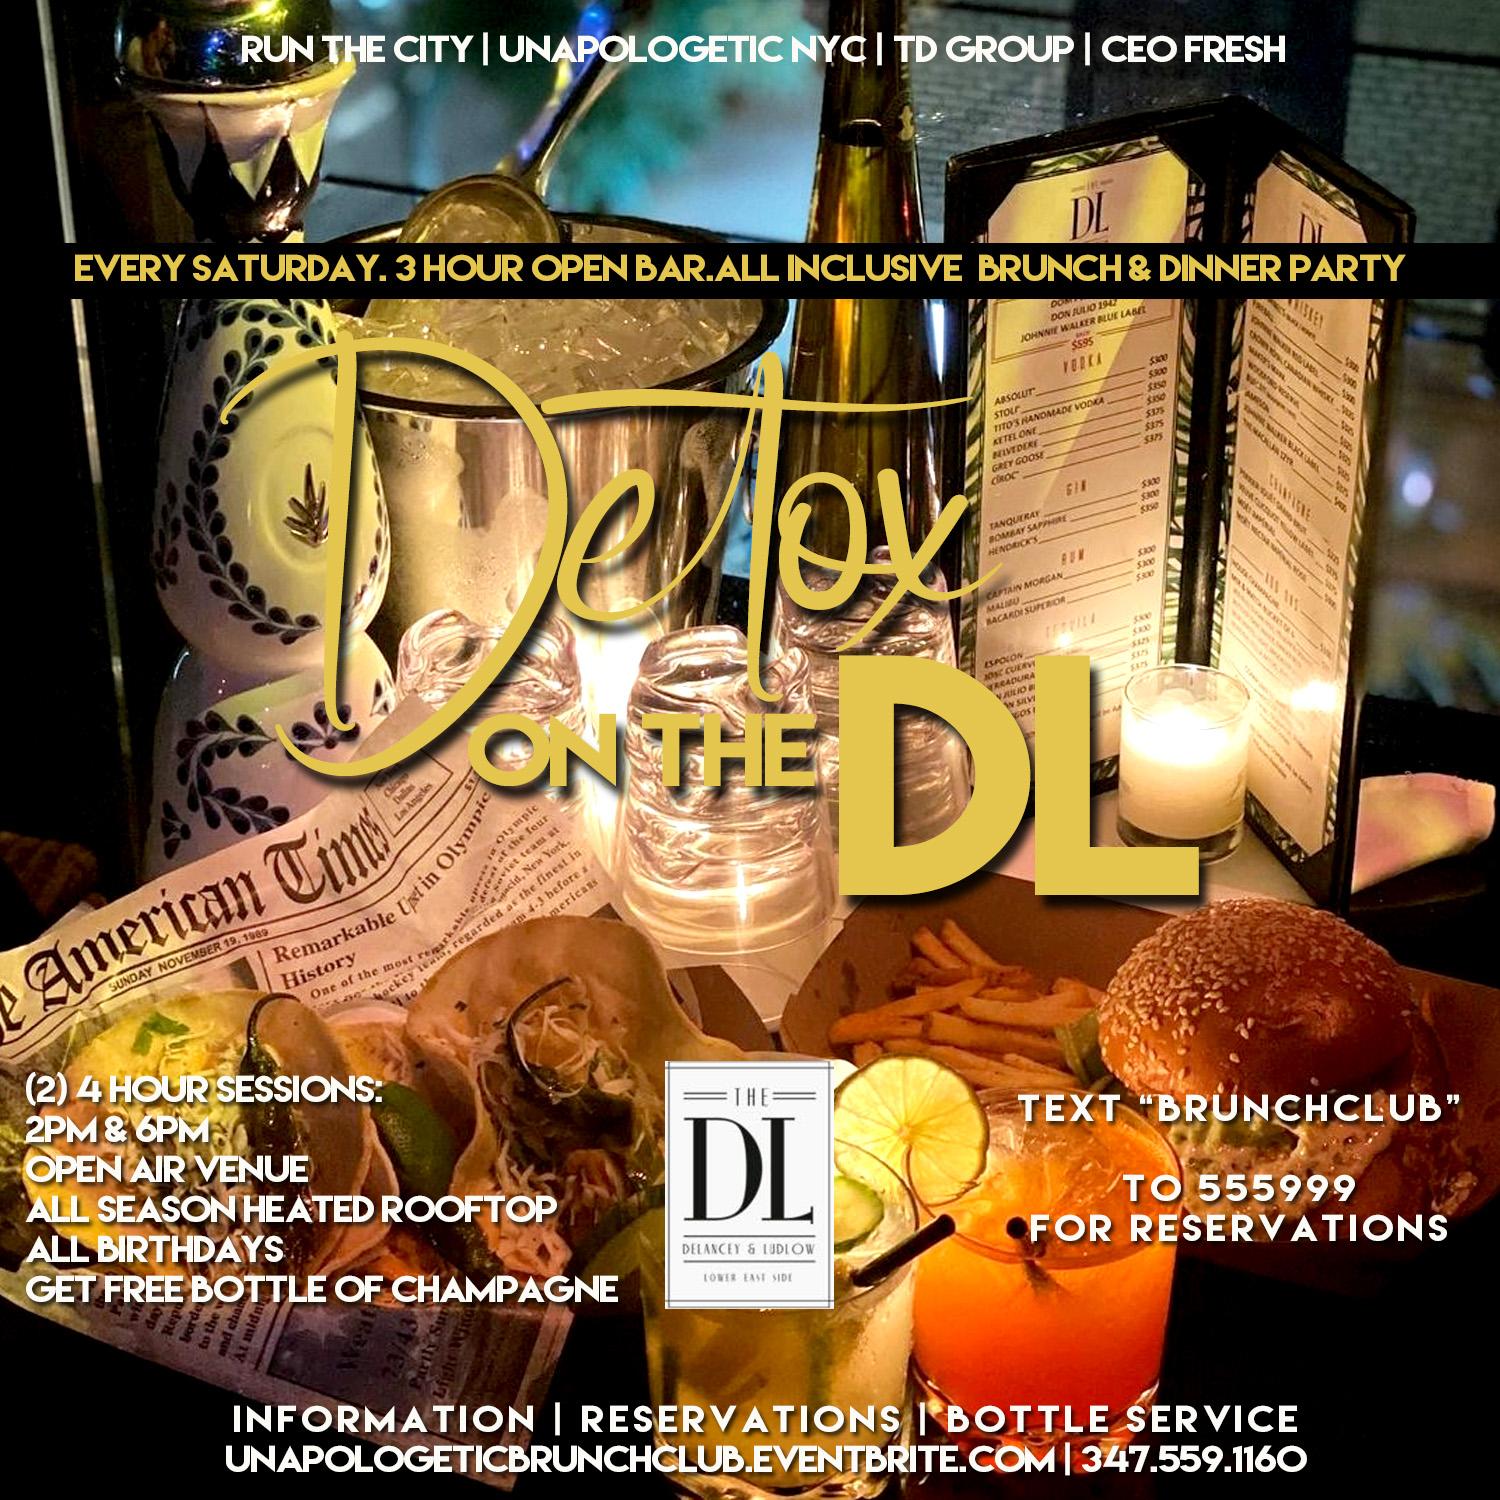 3/6 DETOX SATURDAY ROOFTOP BRUNCH & DINNER PARTY @ THE DL